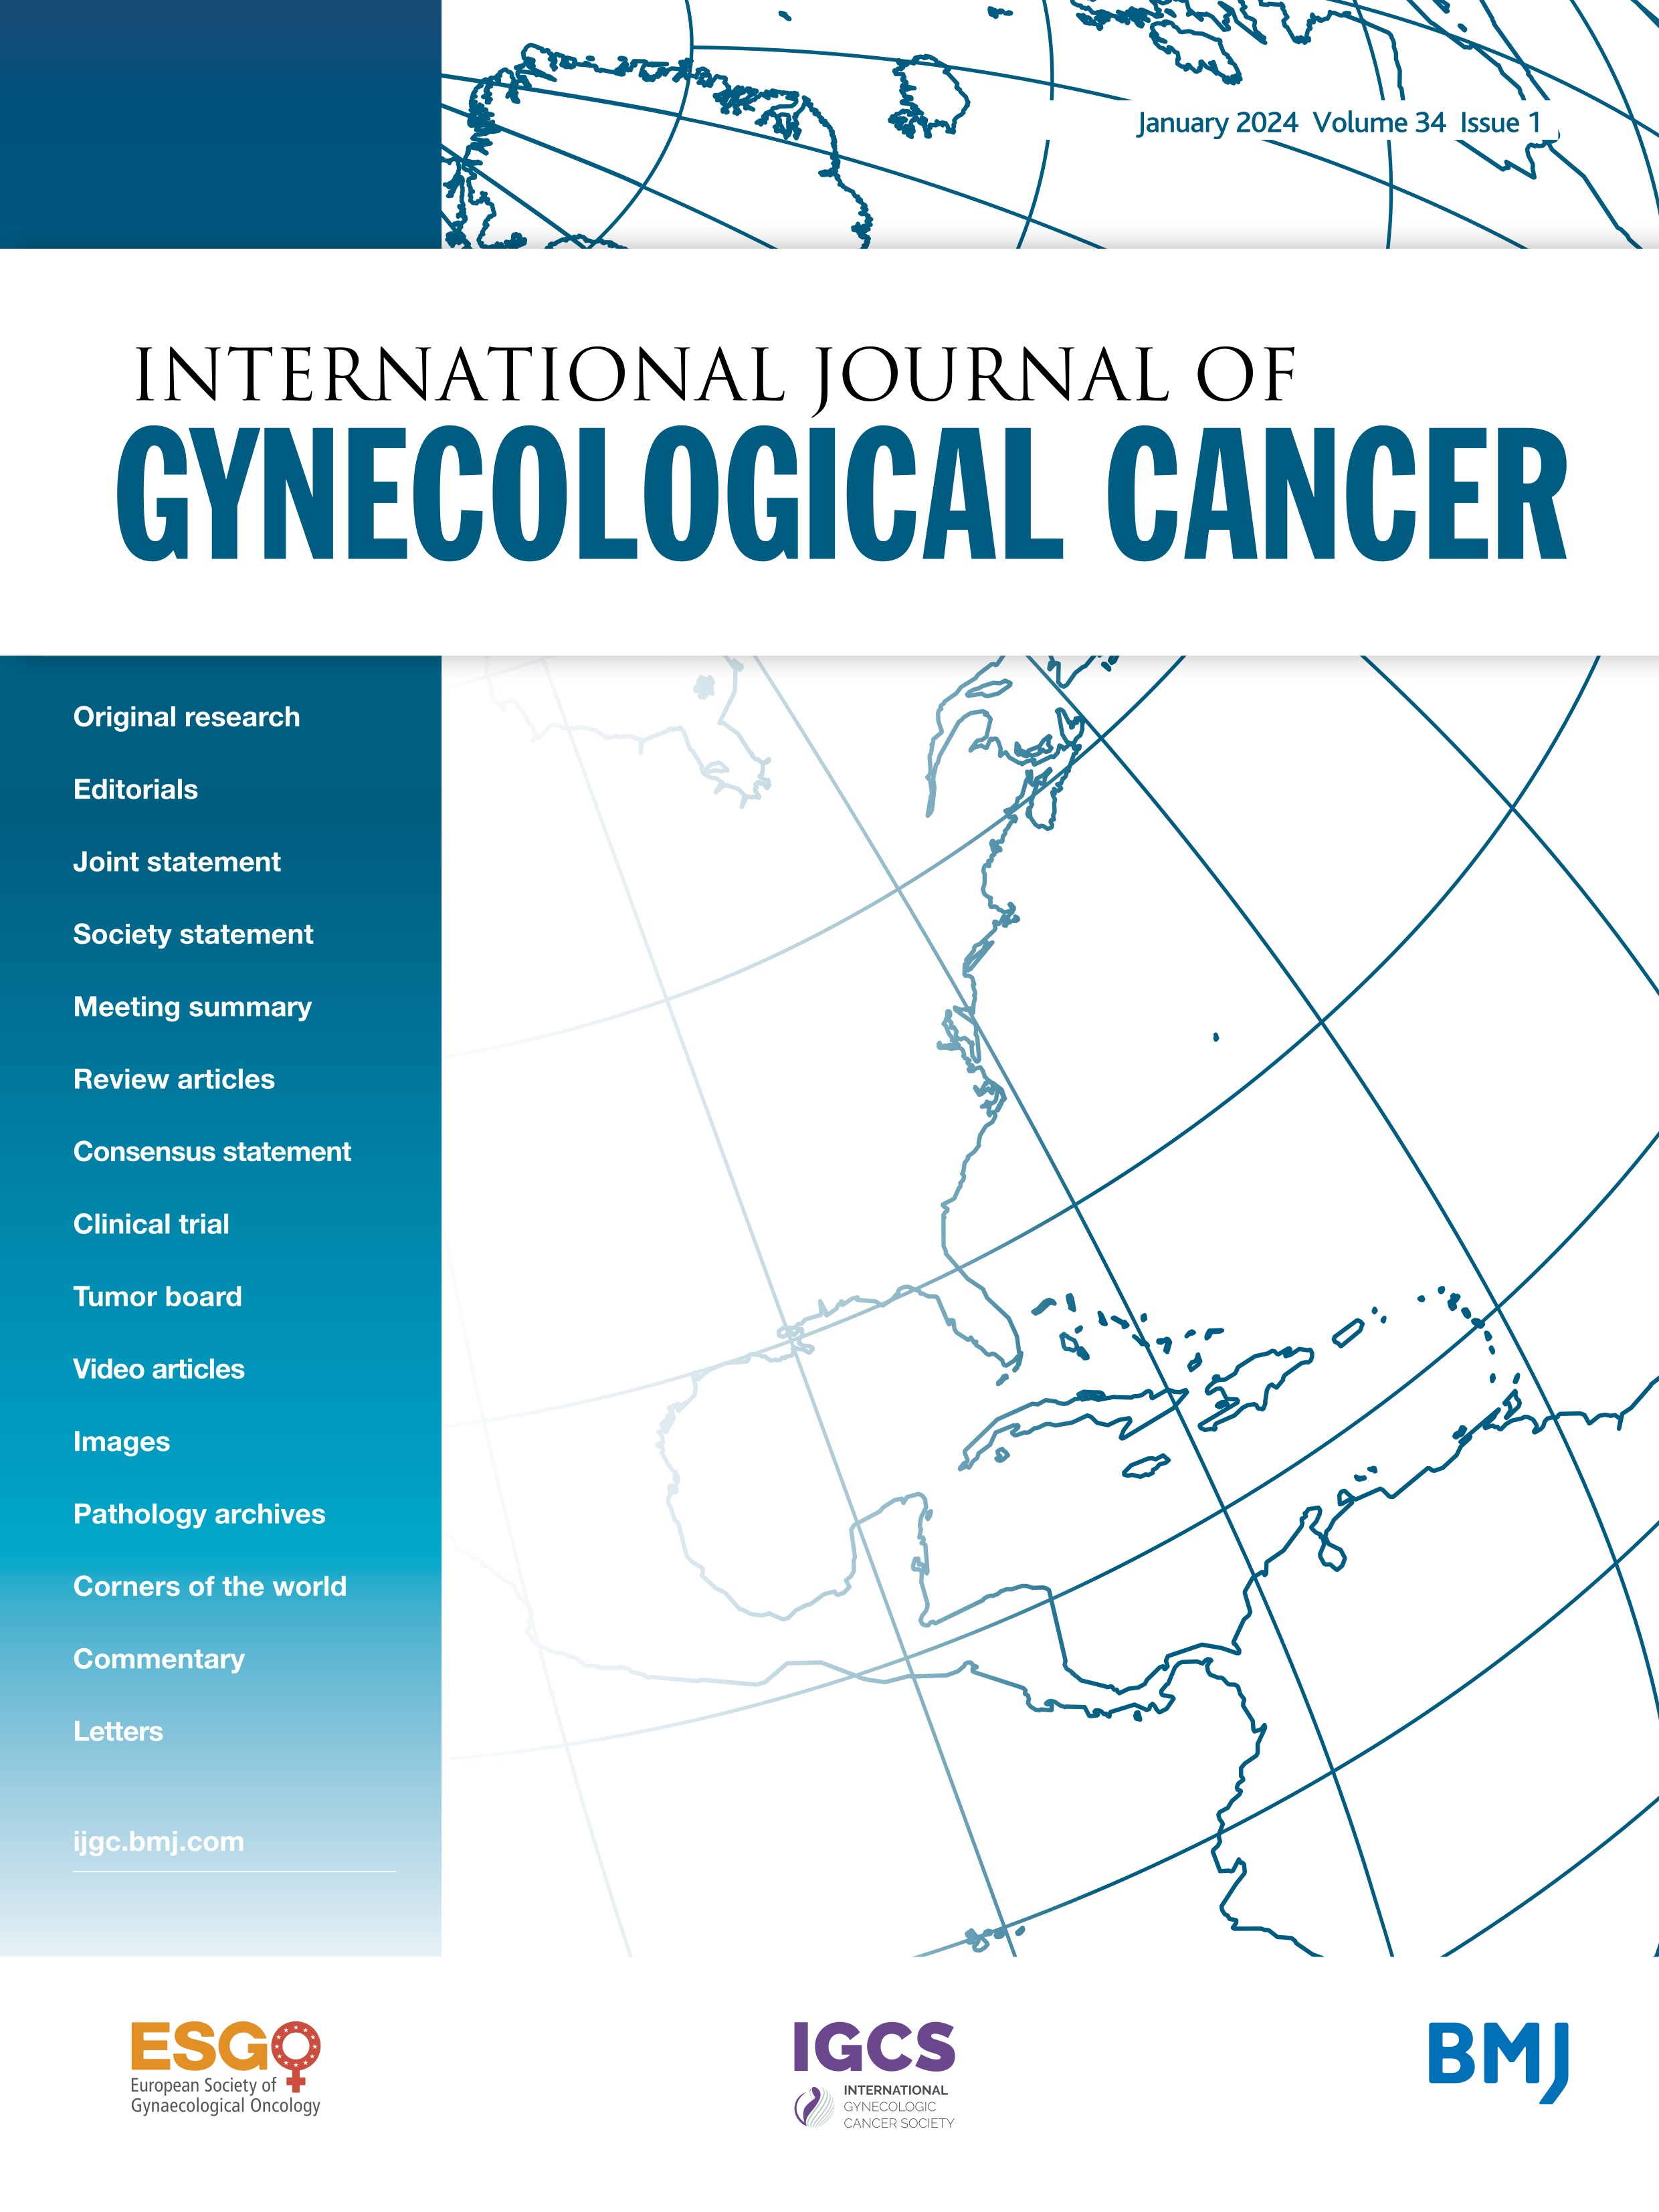 Let go of the myth: safety of indocyanine green for sentinel lymph node mapping in endometrial cancer